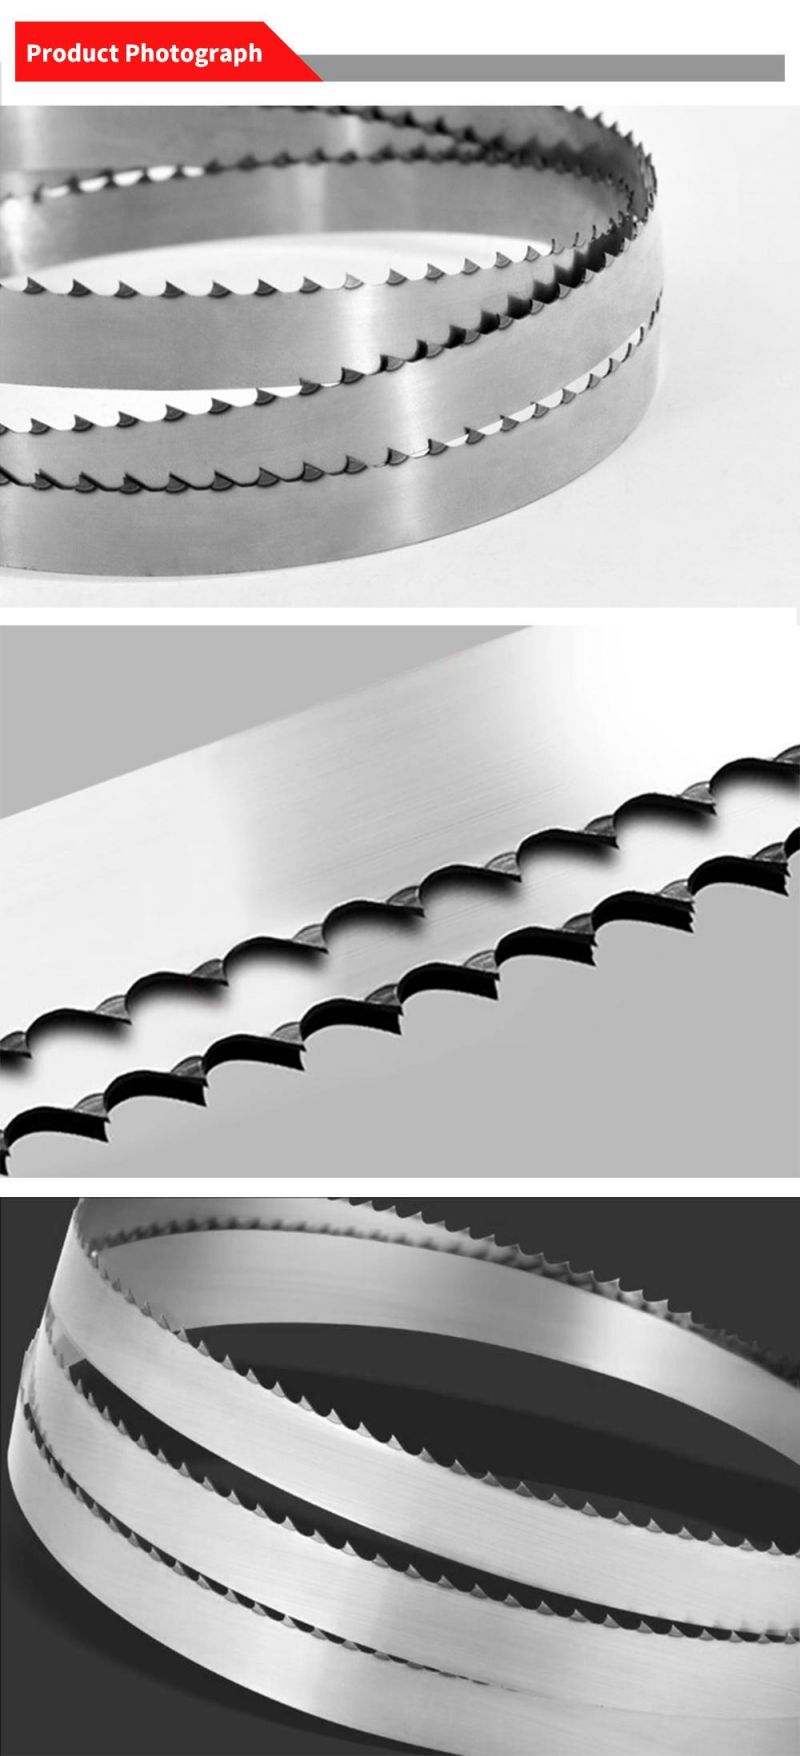 Pilihu Stainless Steel Band Saw Blades for Frozen Fish Meat Cutting